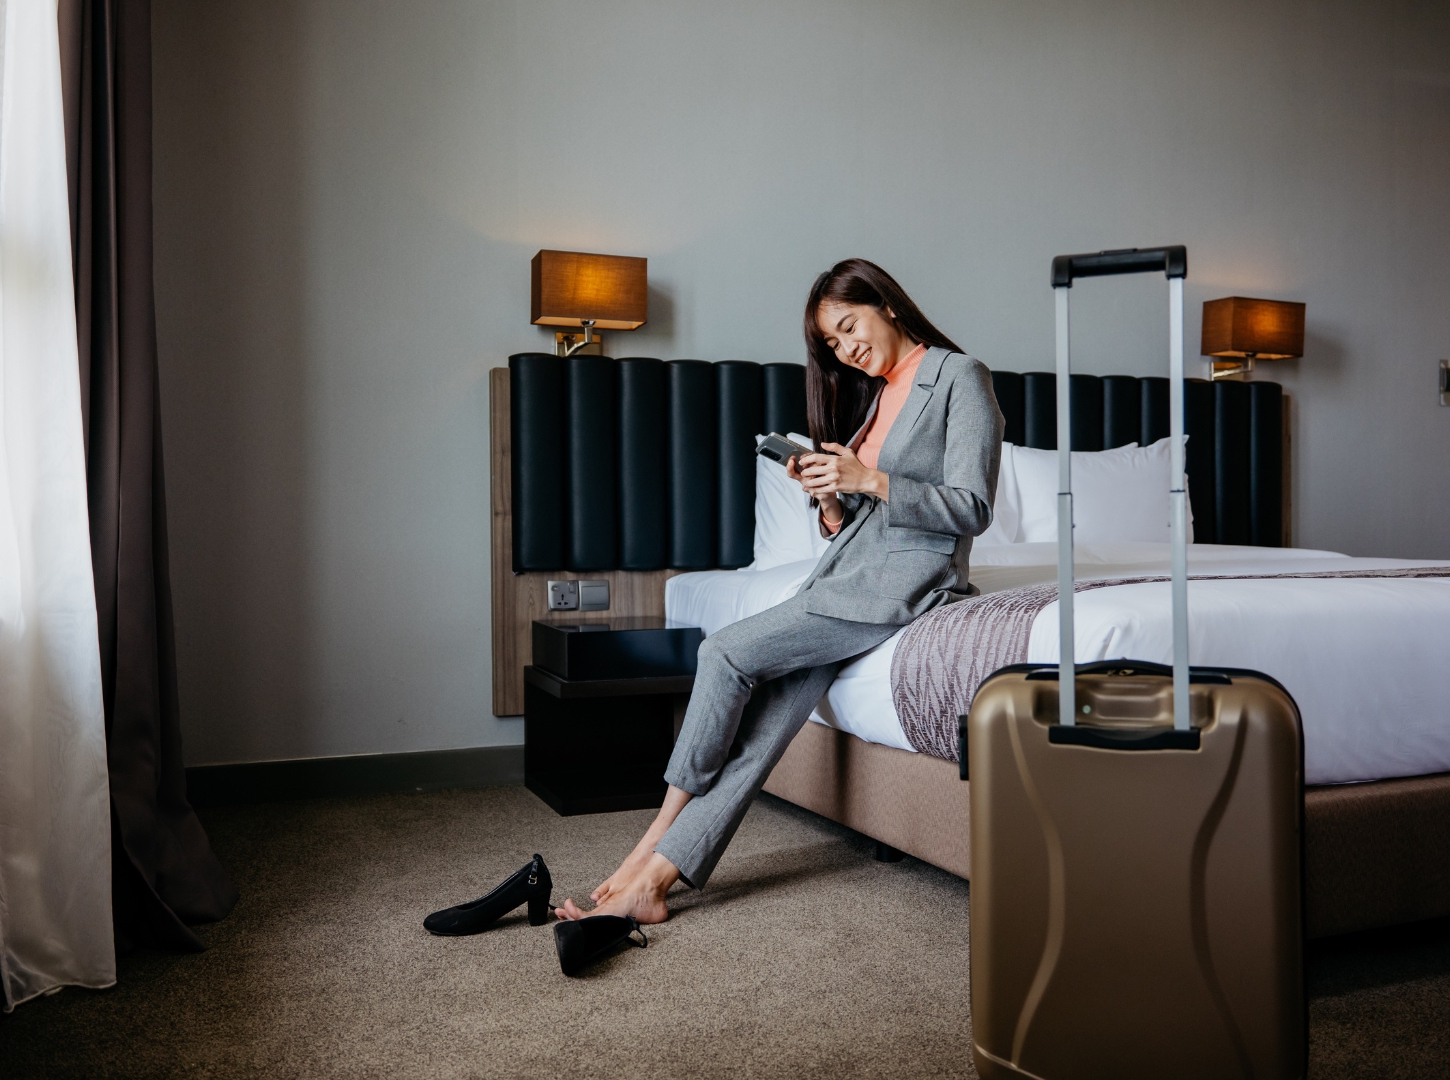 Woman hotel guest in grey sit in suit the hotel bedroom look at her smartphone with brow luggage in front of her